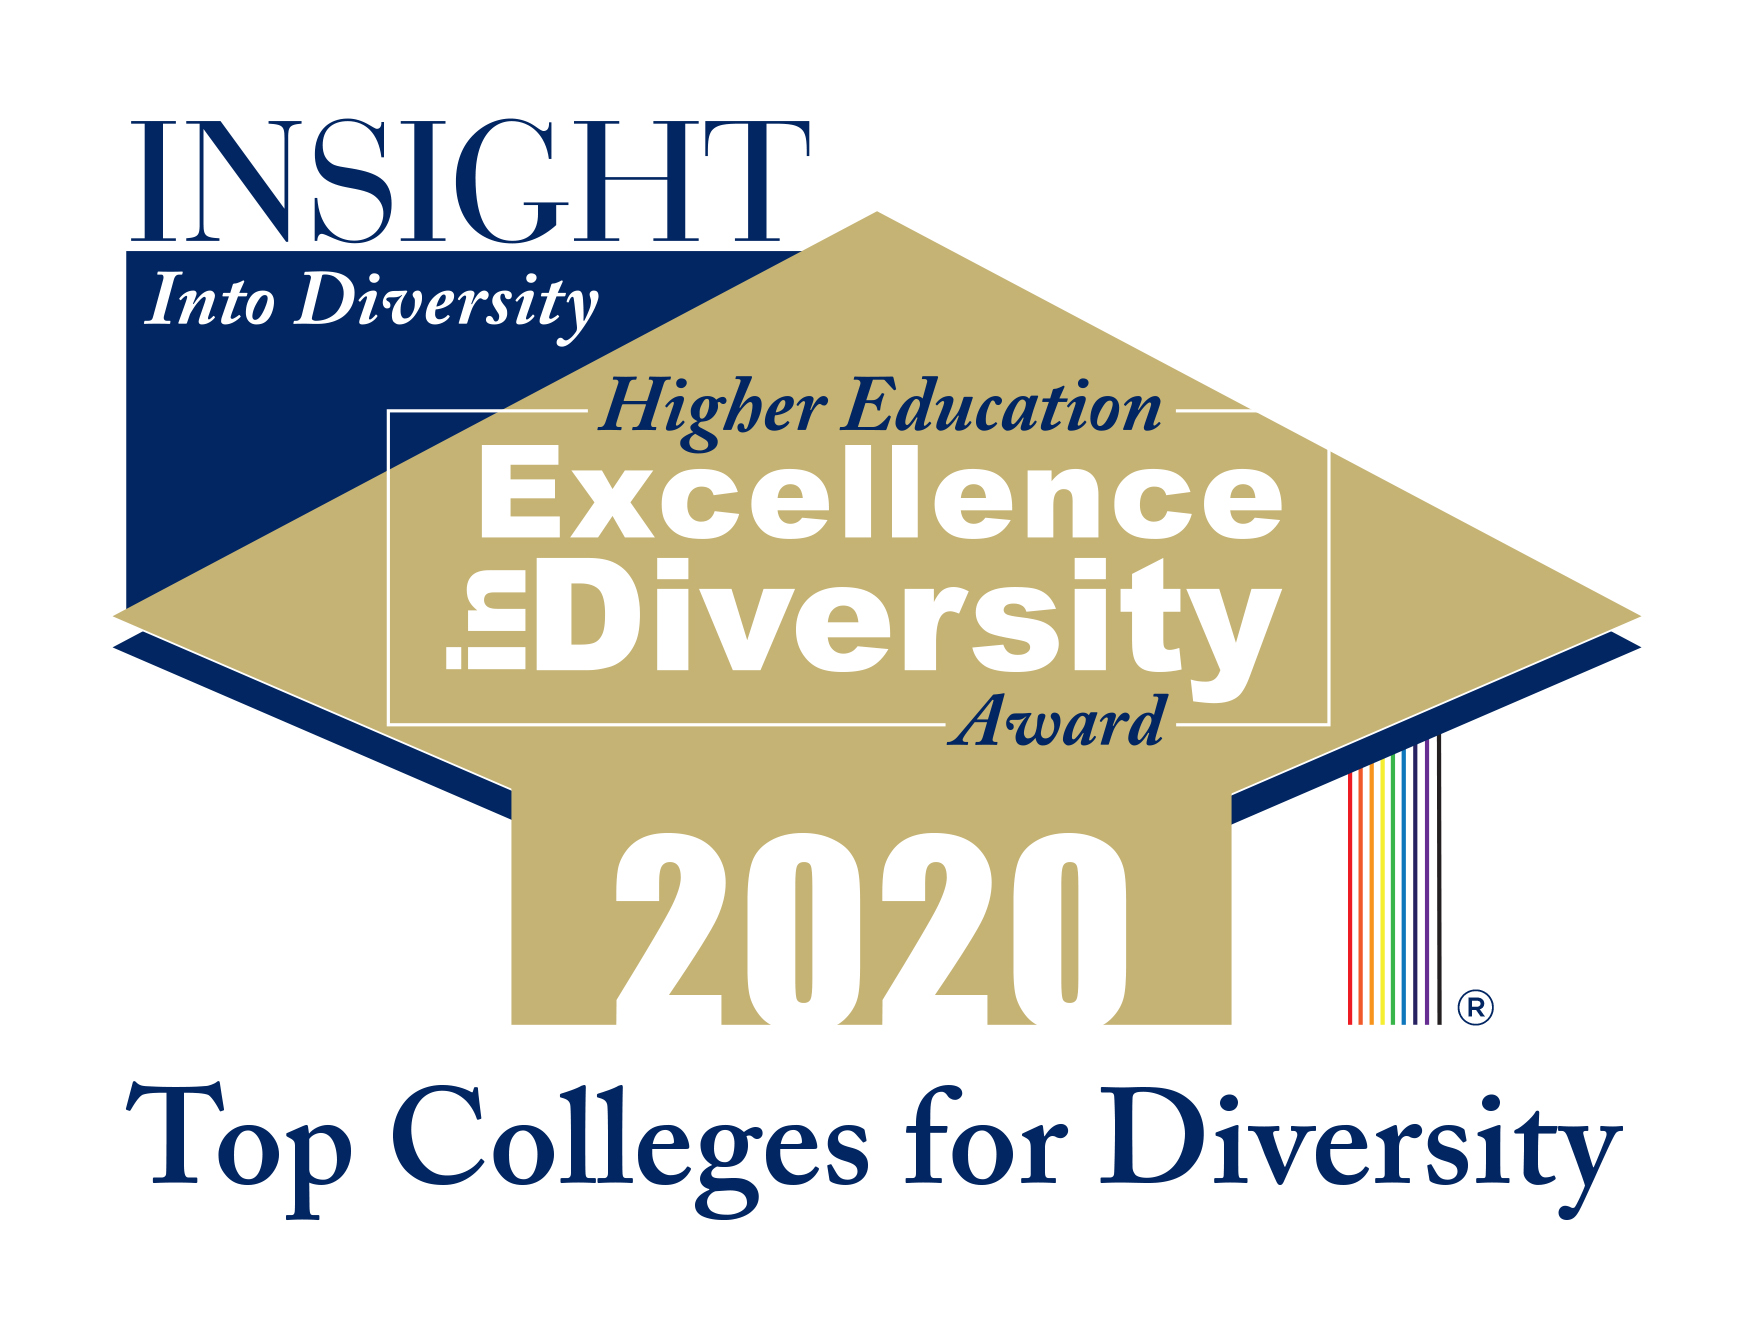 Insight Into Diversity, 2020 Higher Education Excellence in Diversity Award